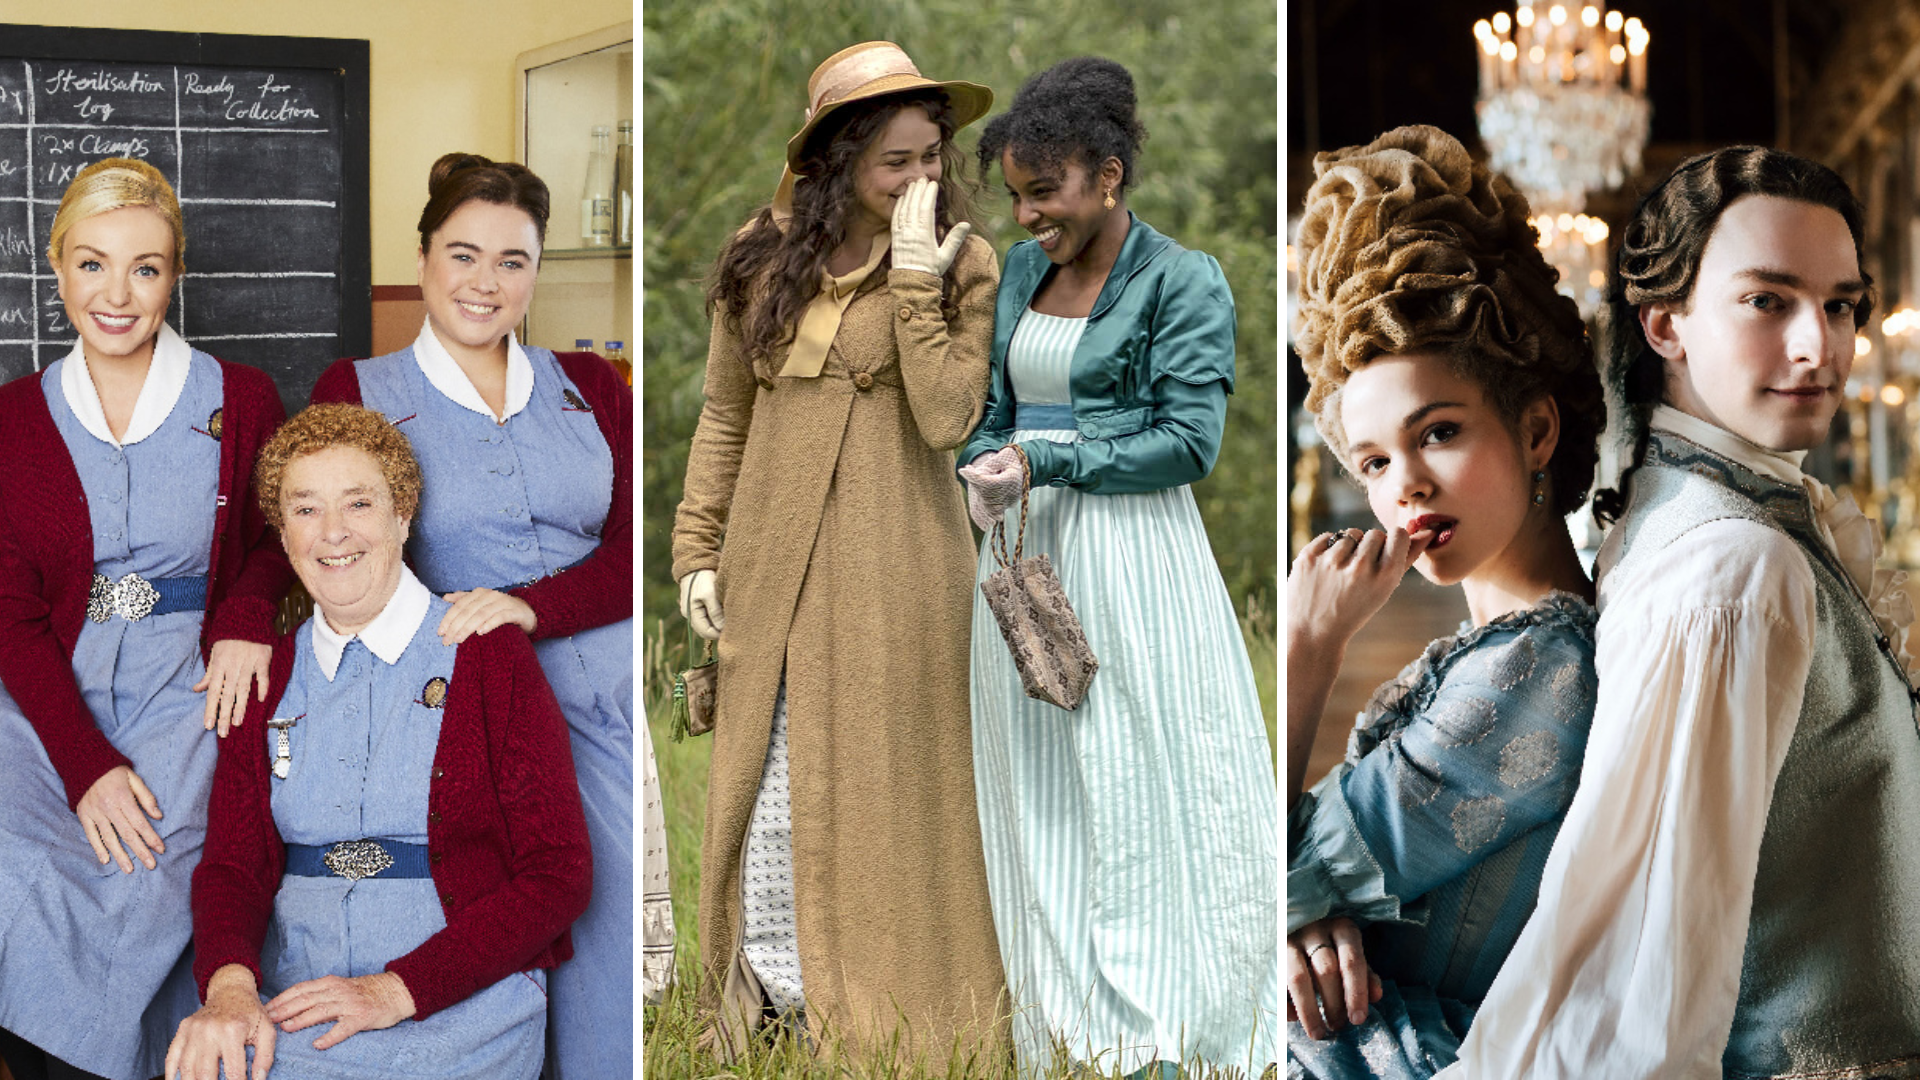 Call the midwife, Sanditon and Marie Antoinette